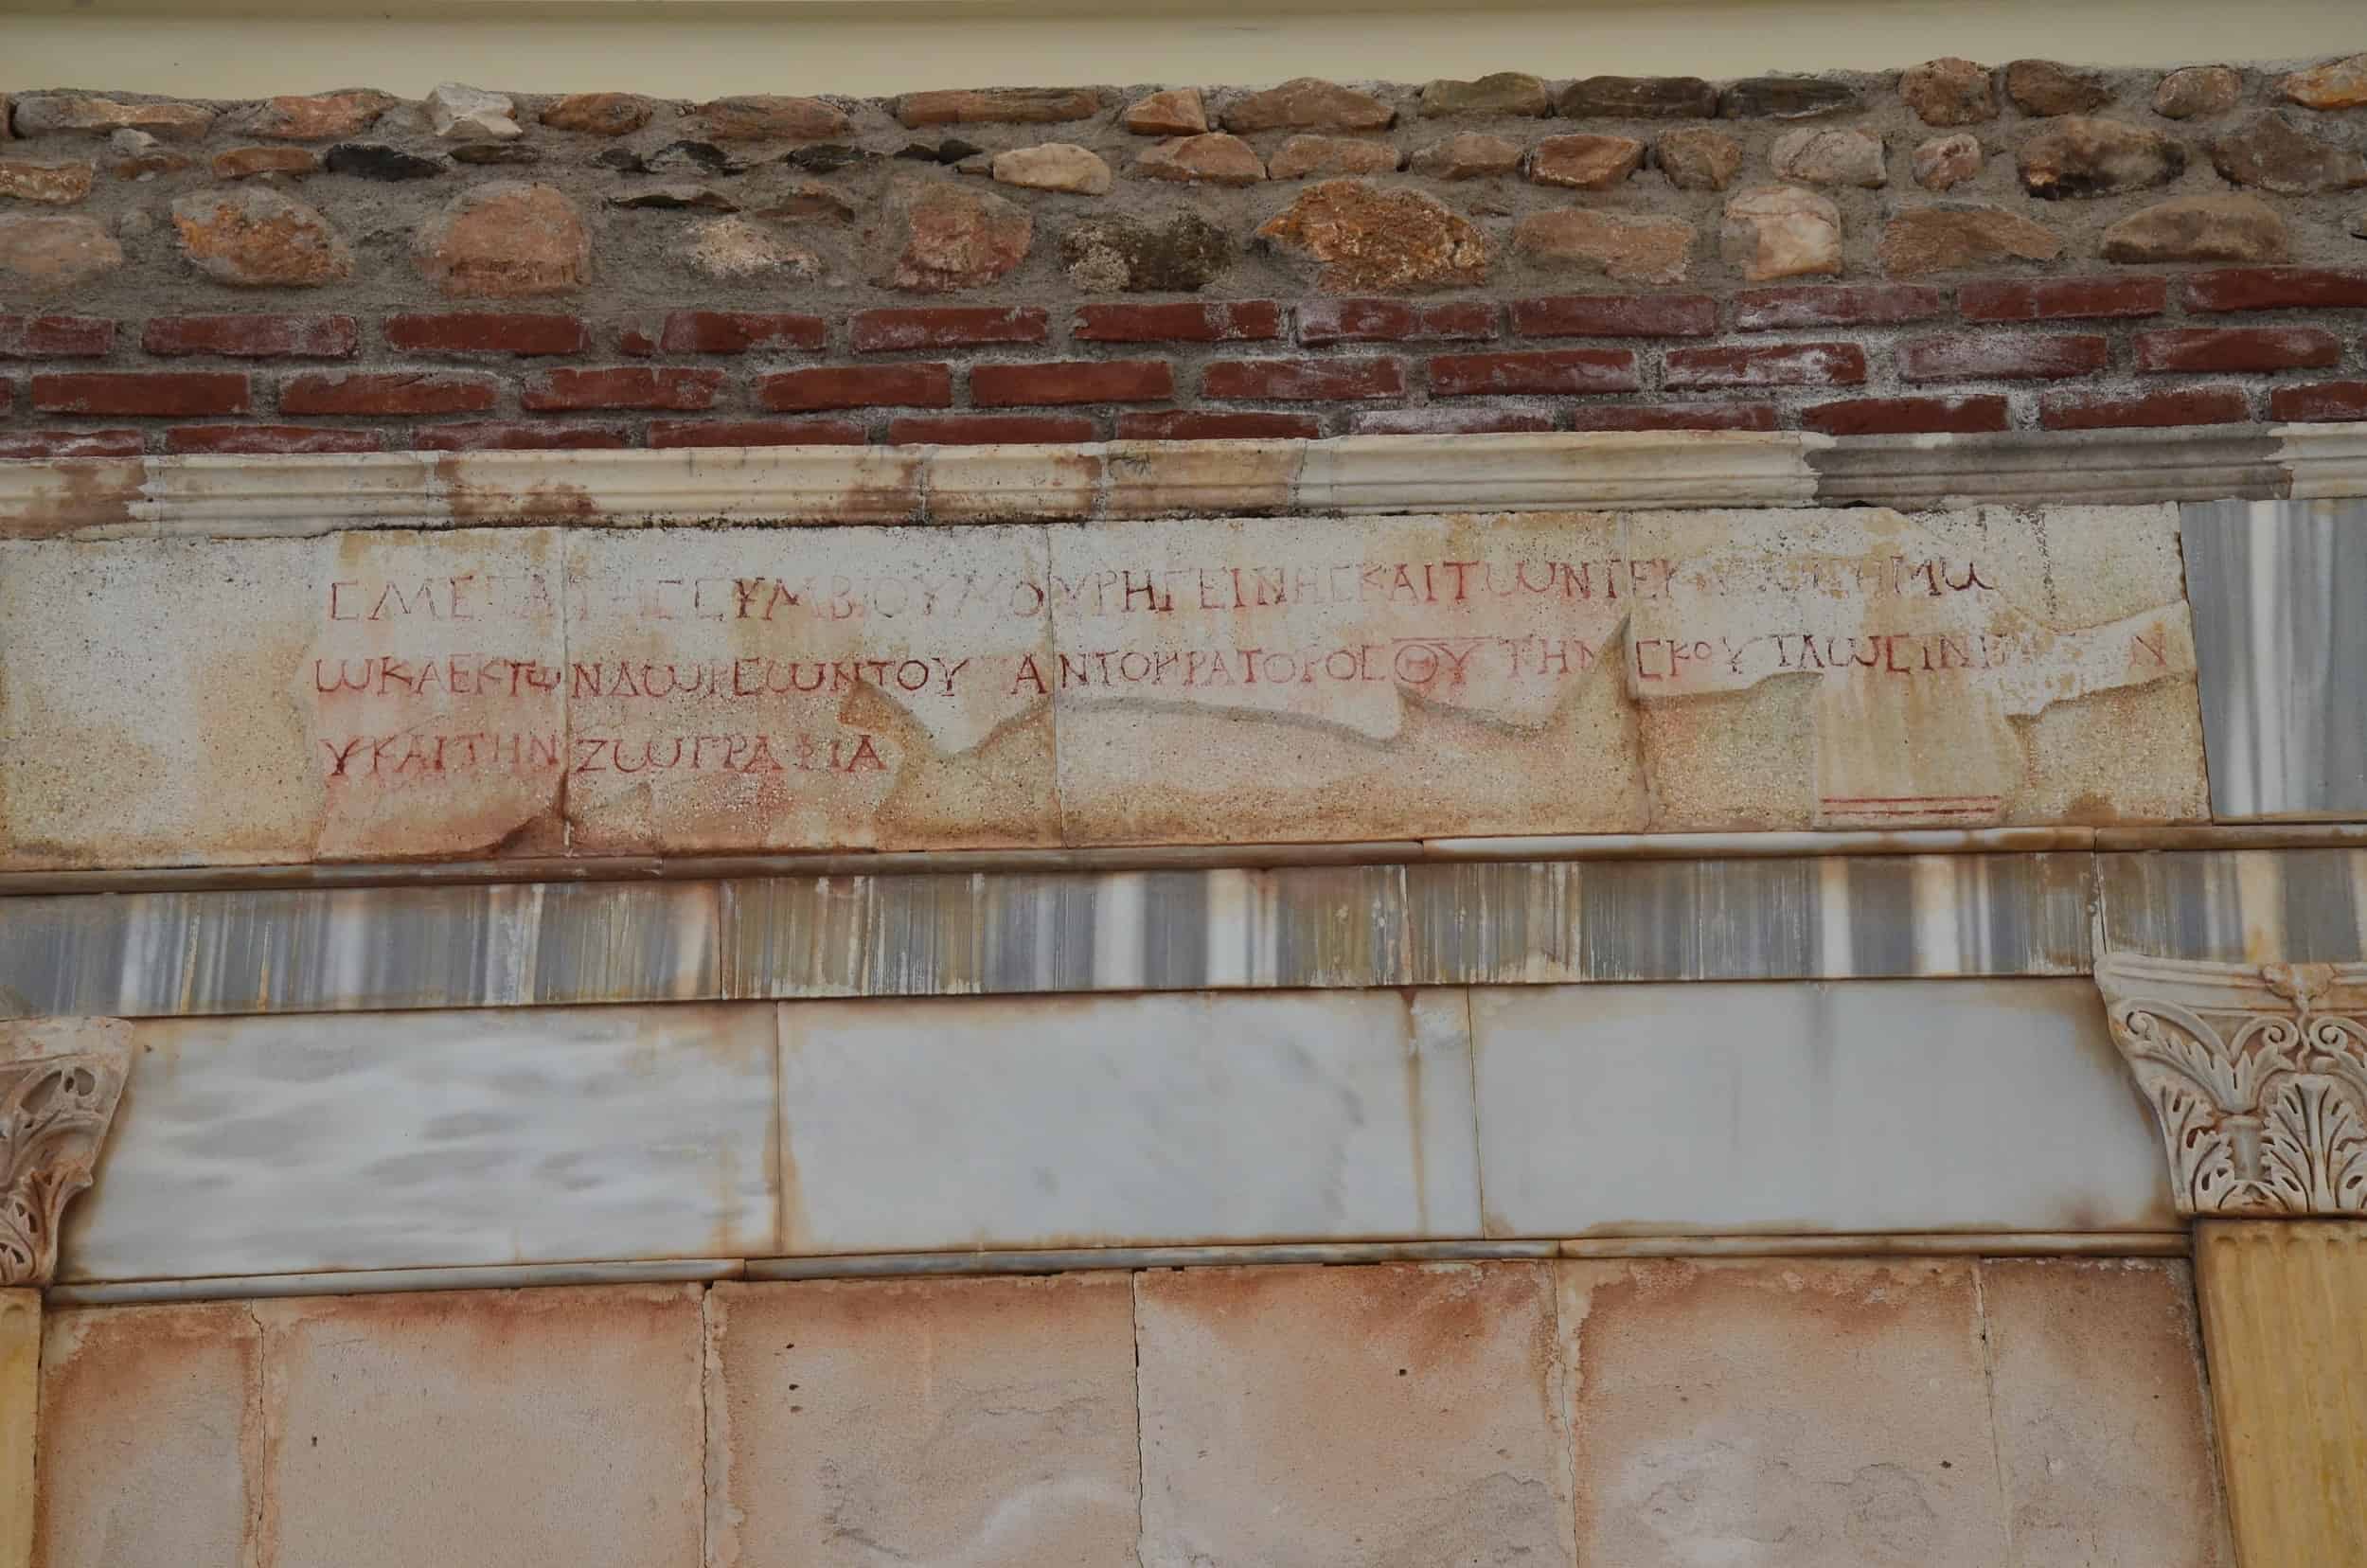 Inscription on the south wall